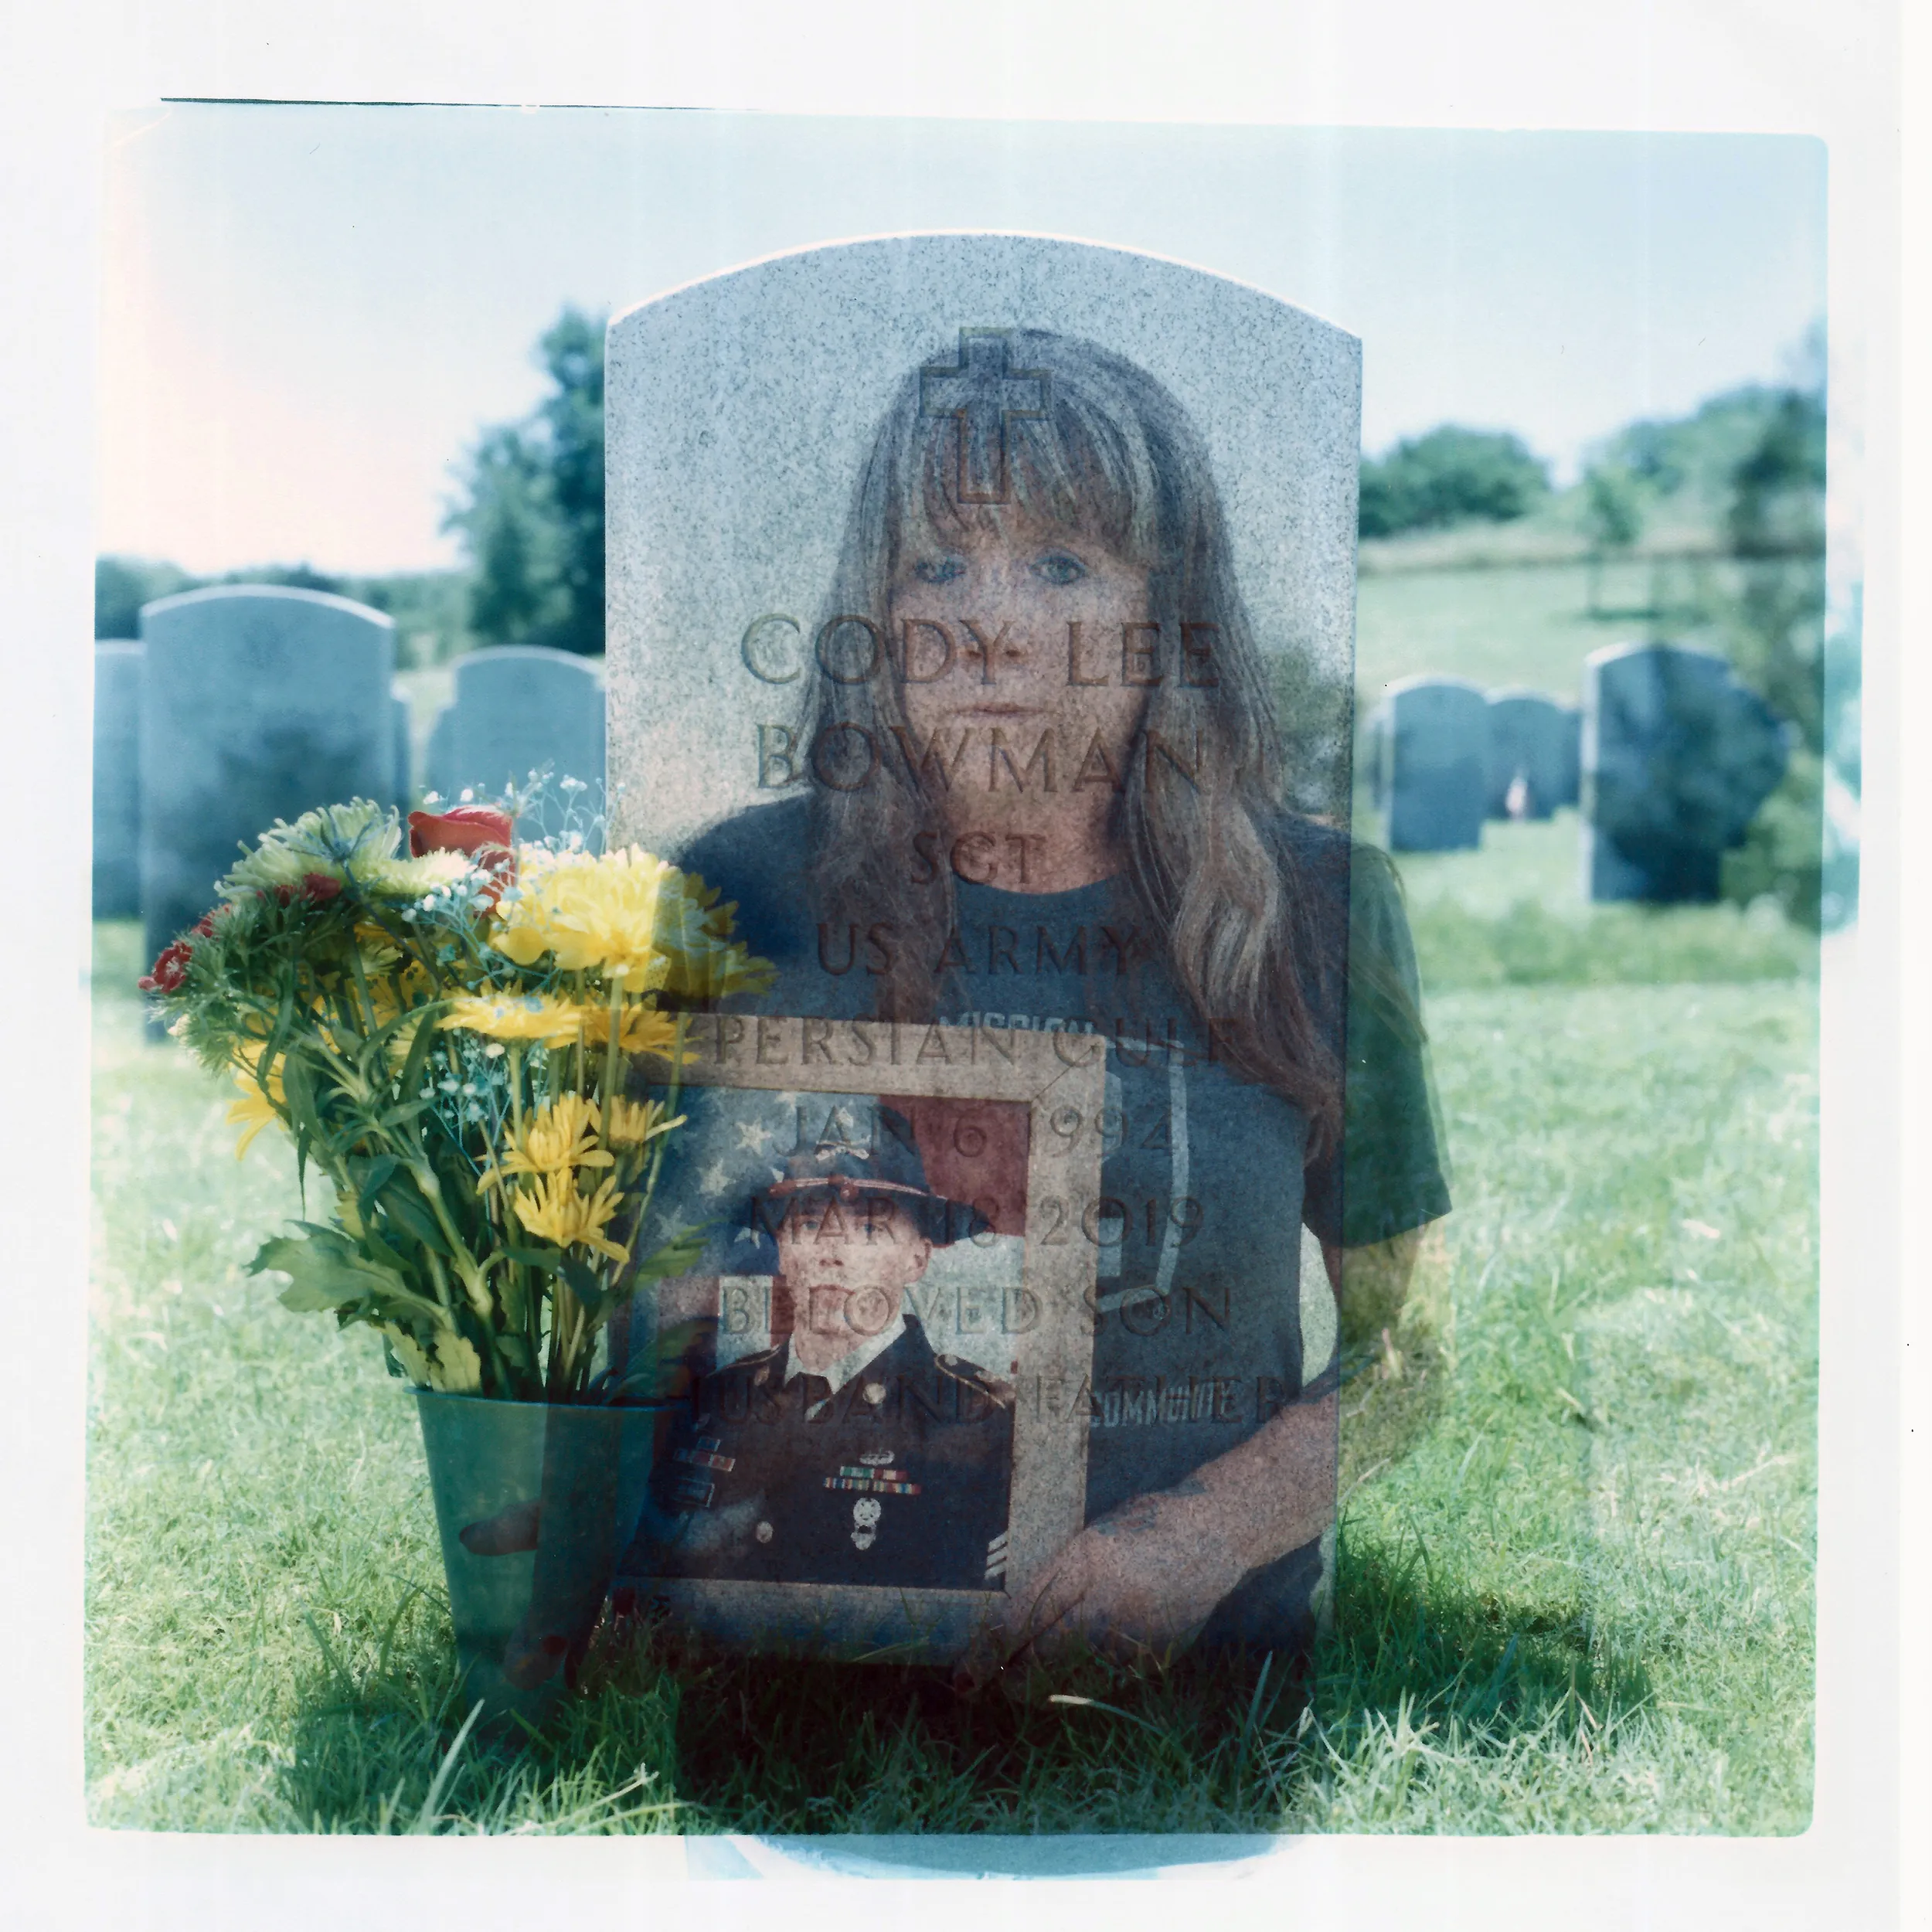 A double exposure made from a headshot of Barbie Rohde layered with a photo of Cody Lee Bowman's tombstone.